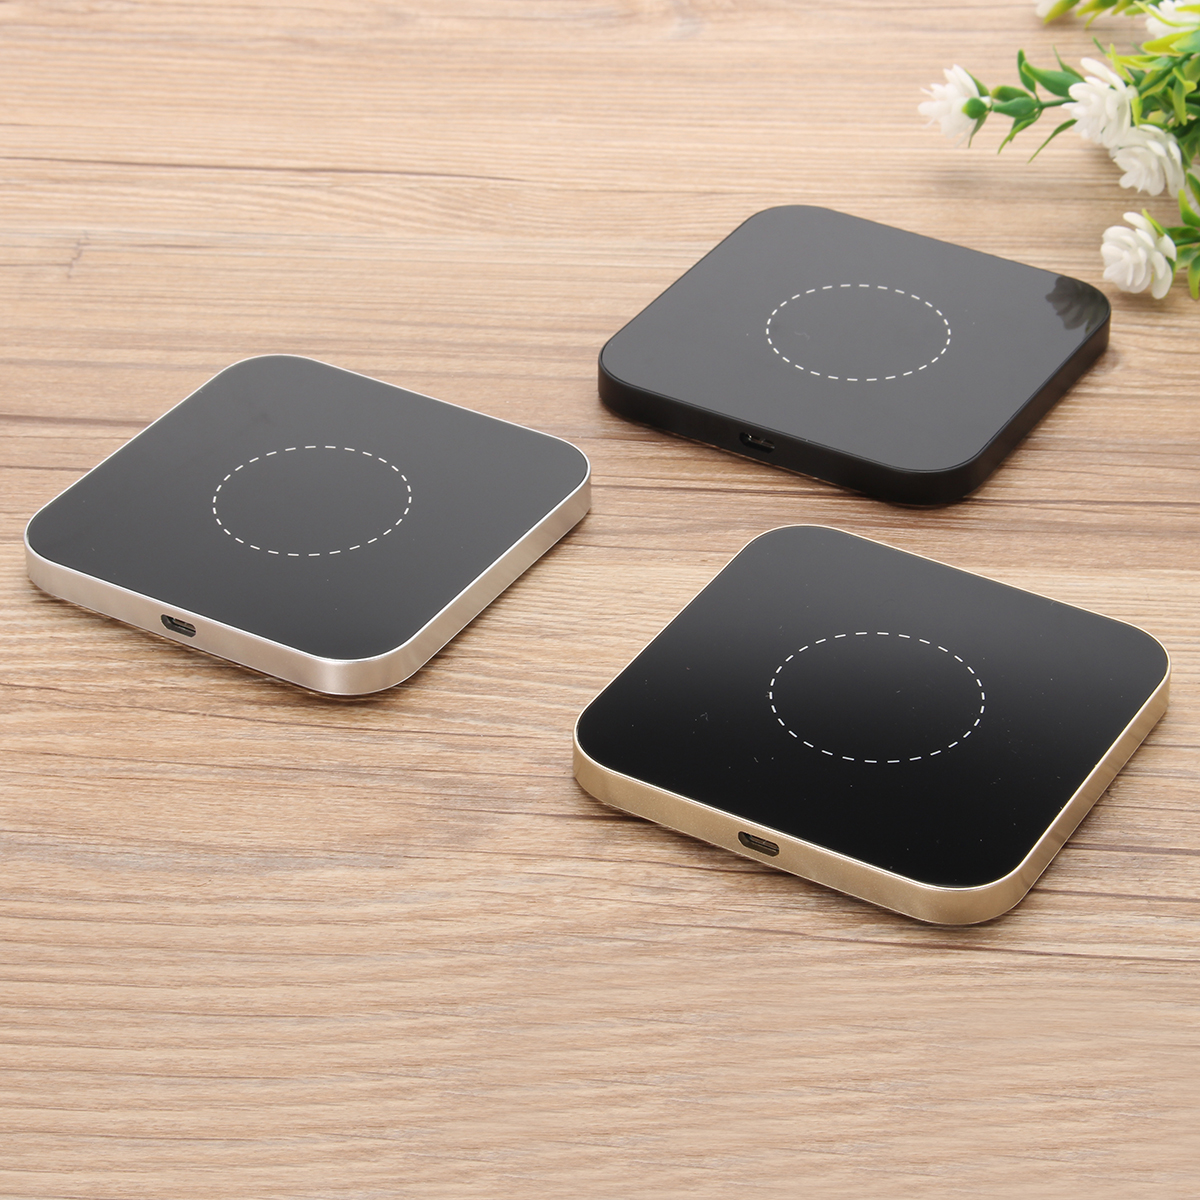 Qi-Wireless-Fast-Charging-Pad-for-iPhone-8-Plus-X-Samsung-Galaxy-S7-S8-1243264-11